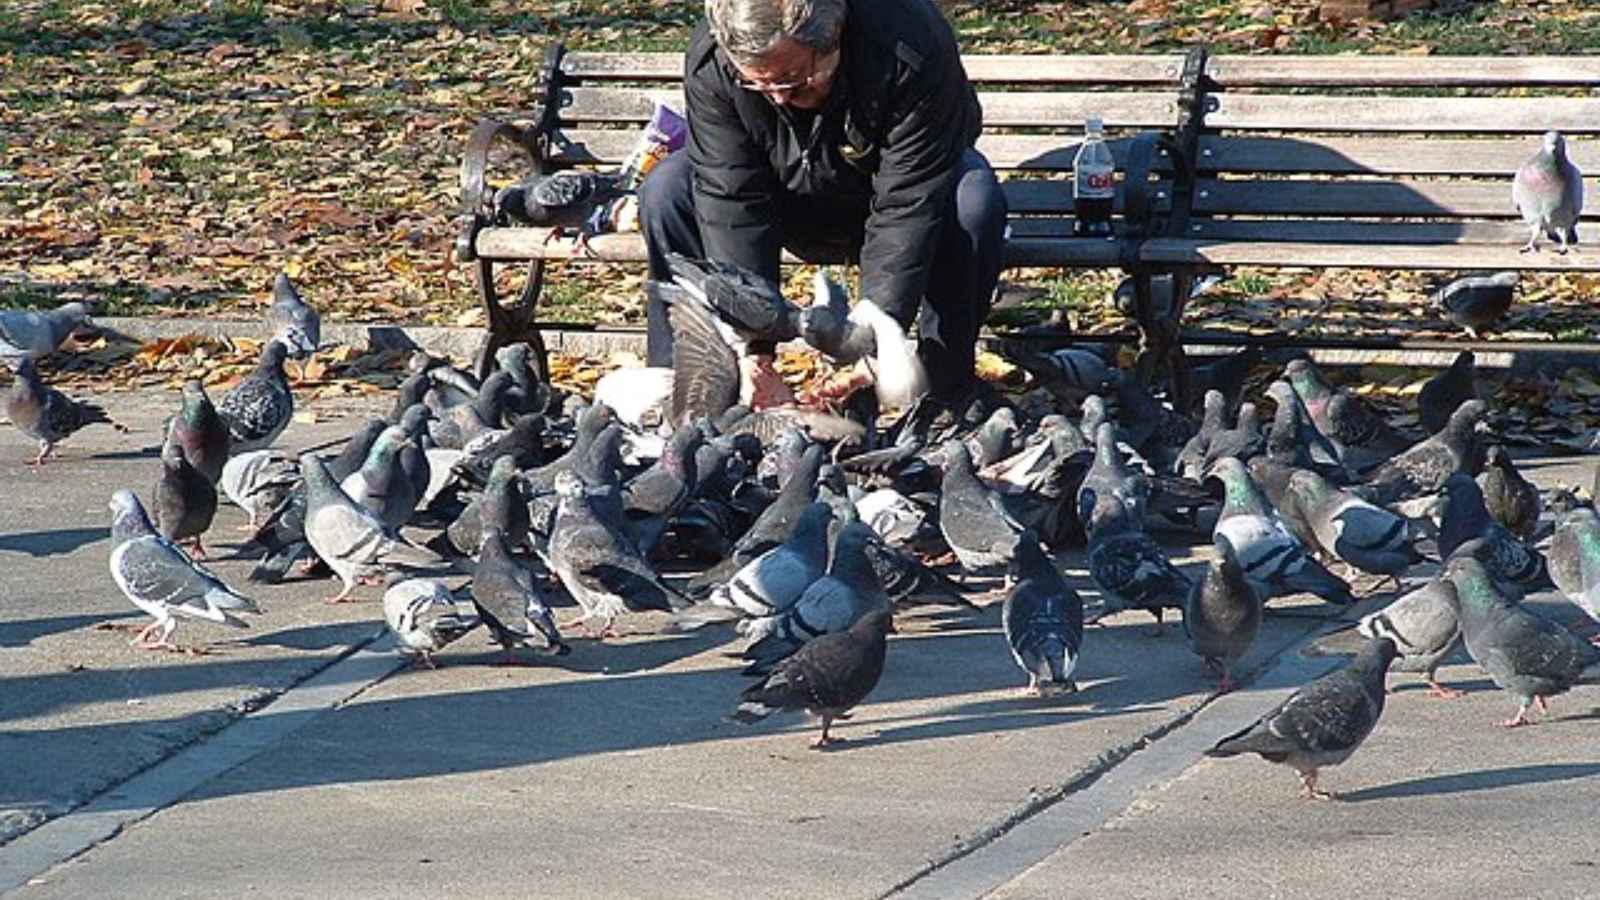 <p>Sure, feeding pigeons might seem like a harmless pastime. But in Venice, it’s banned. Why? Because pigeons, despite being photogenic, are also monument-destroying fiends. Keep your snacks to yourself here.</p>